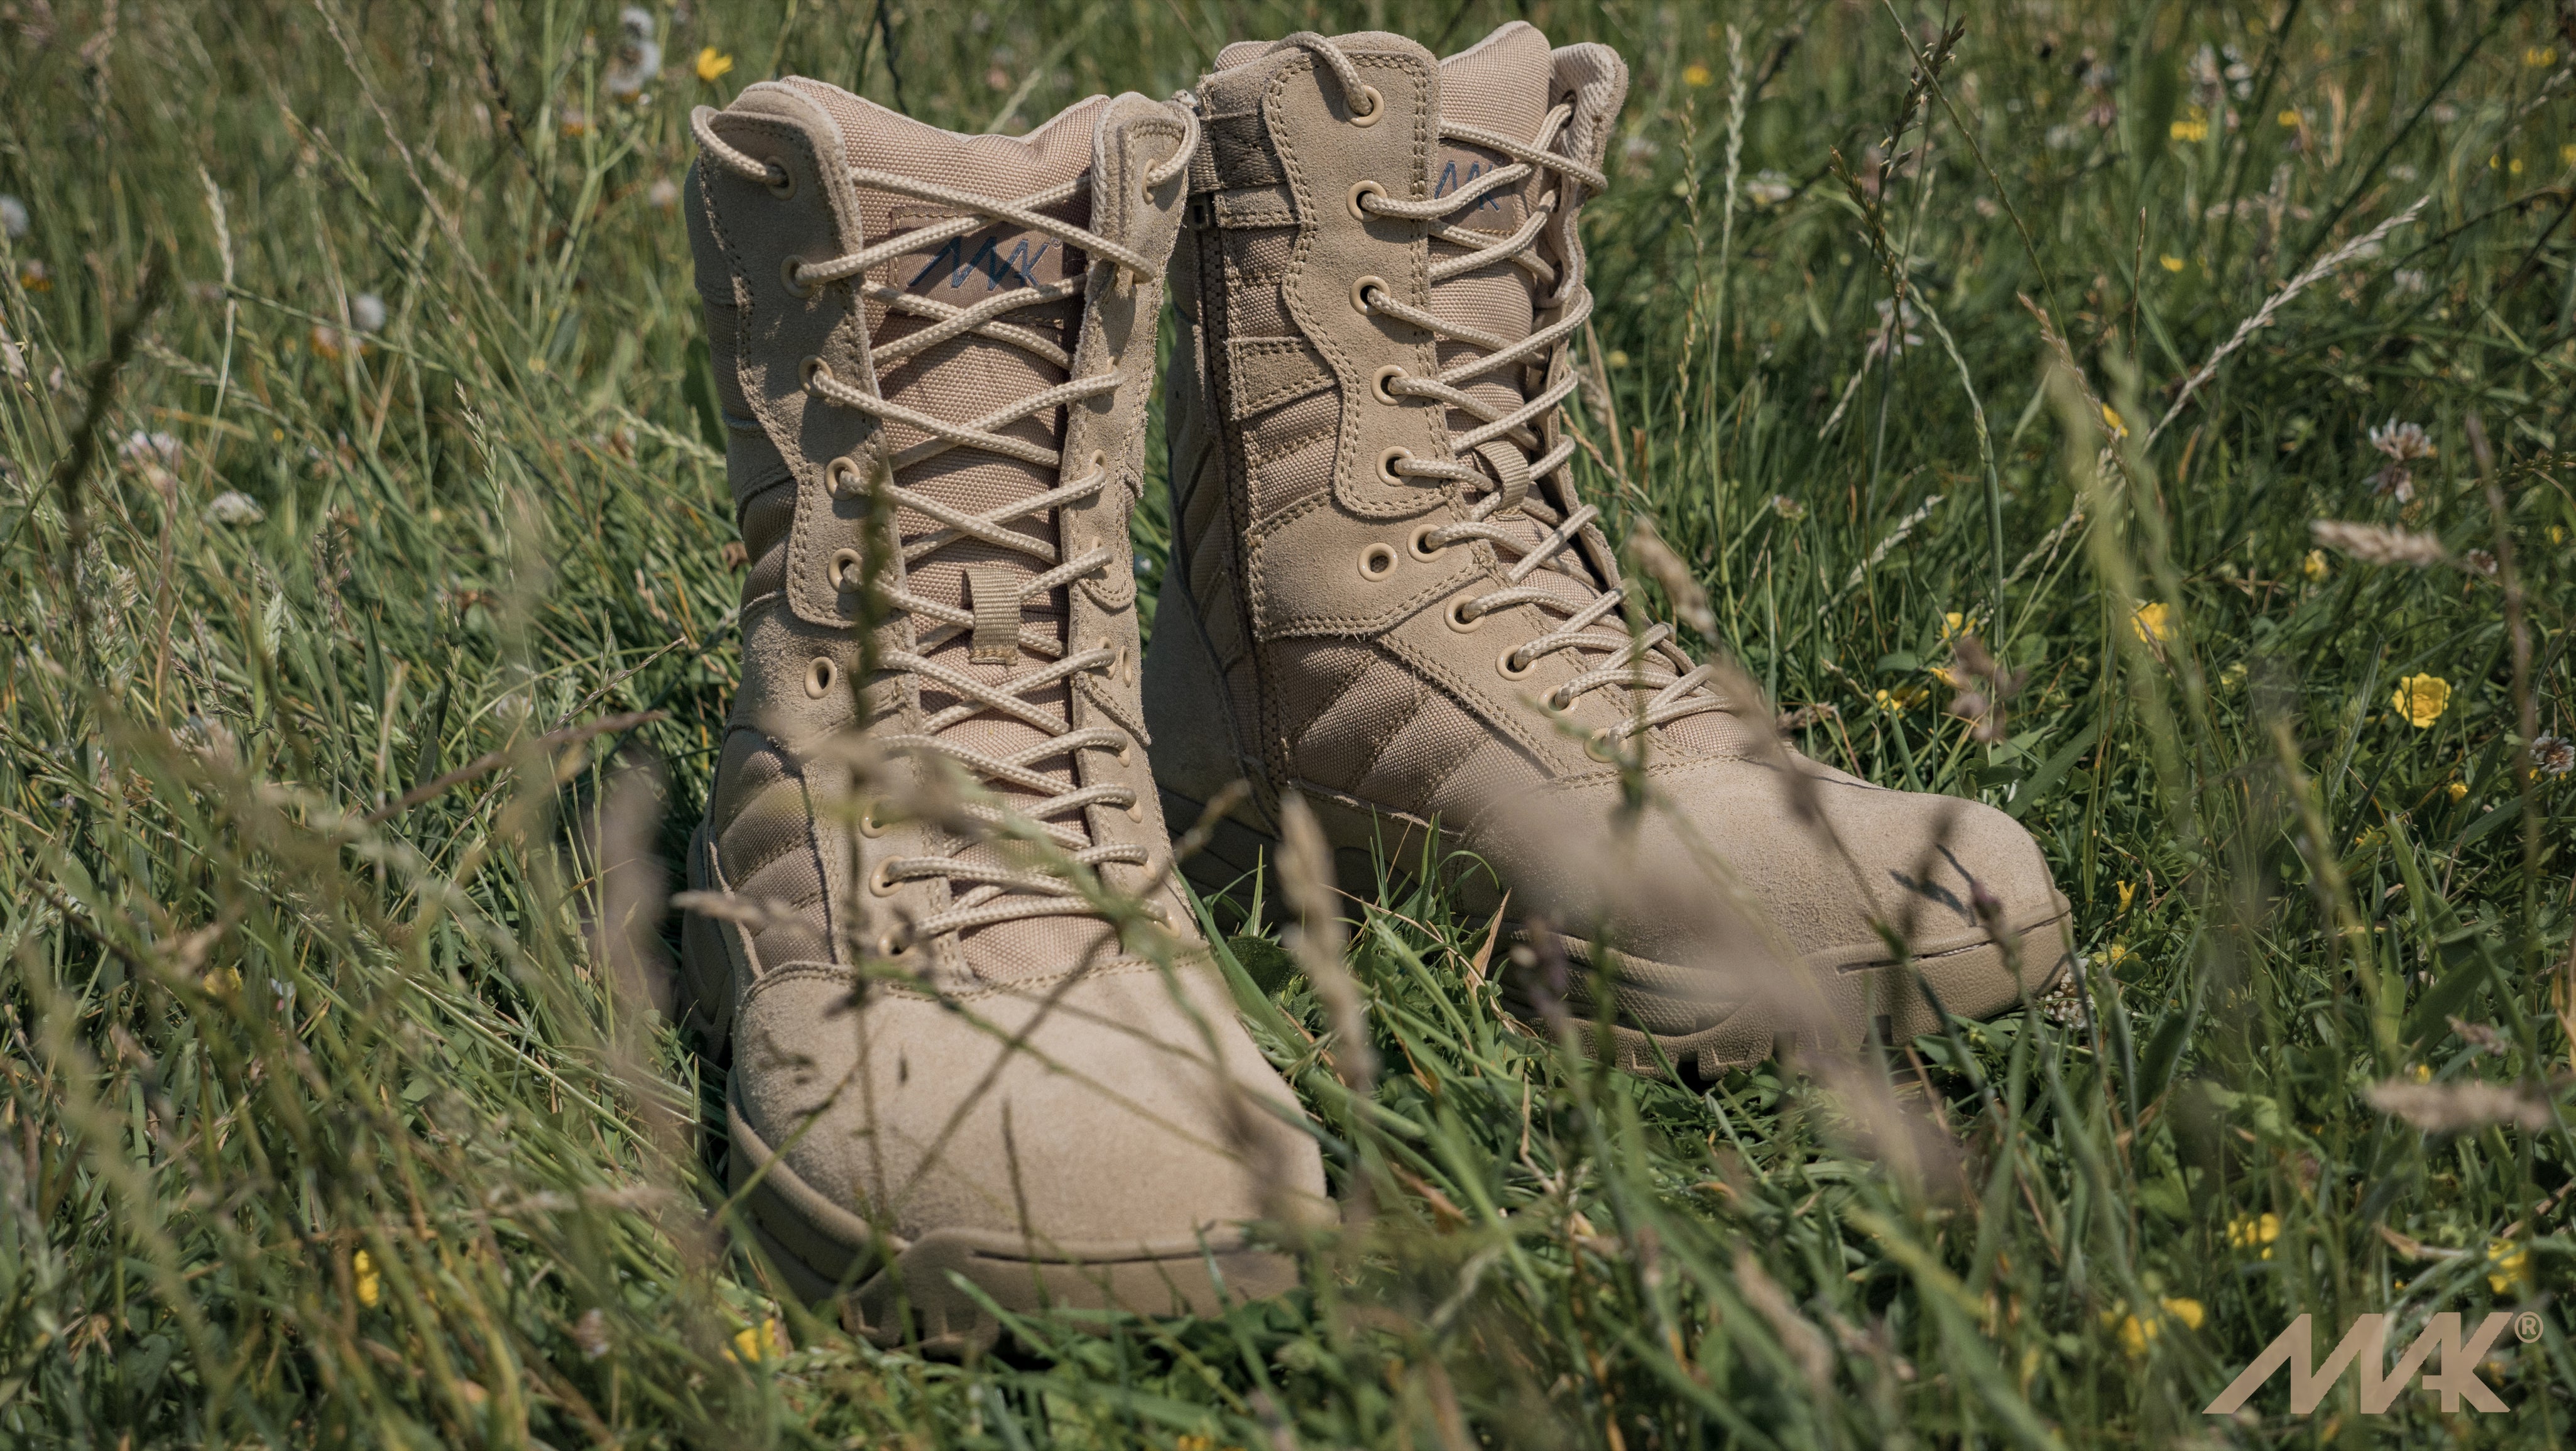 protector 9" military boots in desert tan pictured in the grass